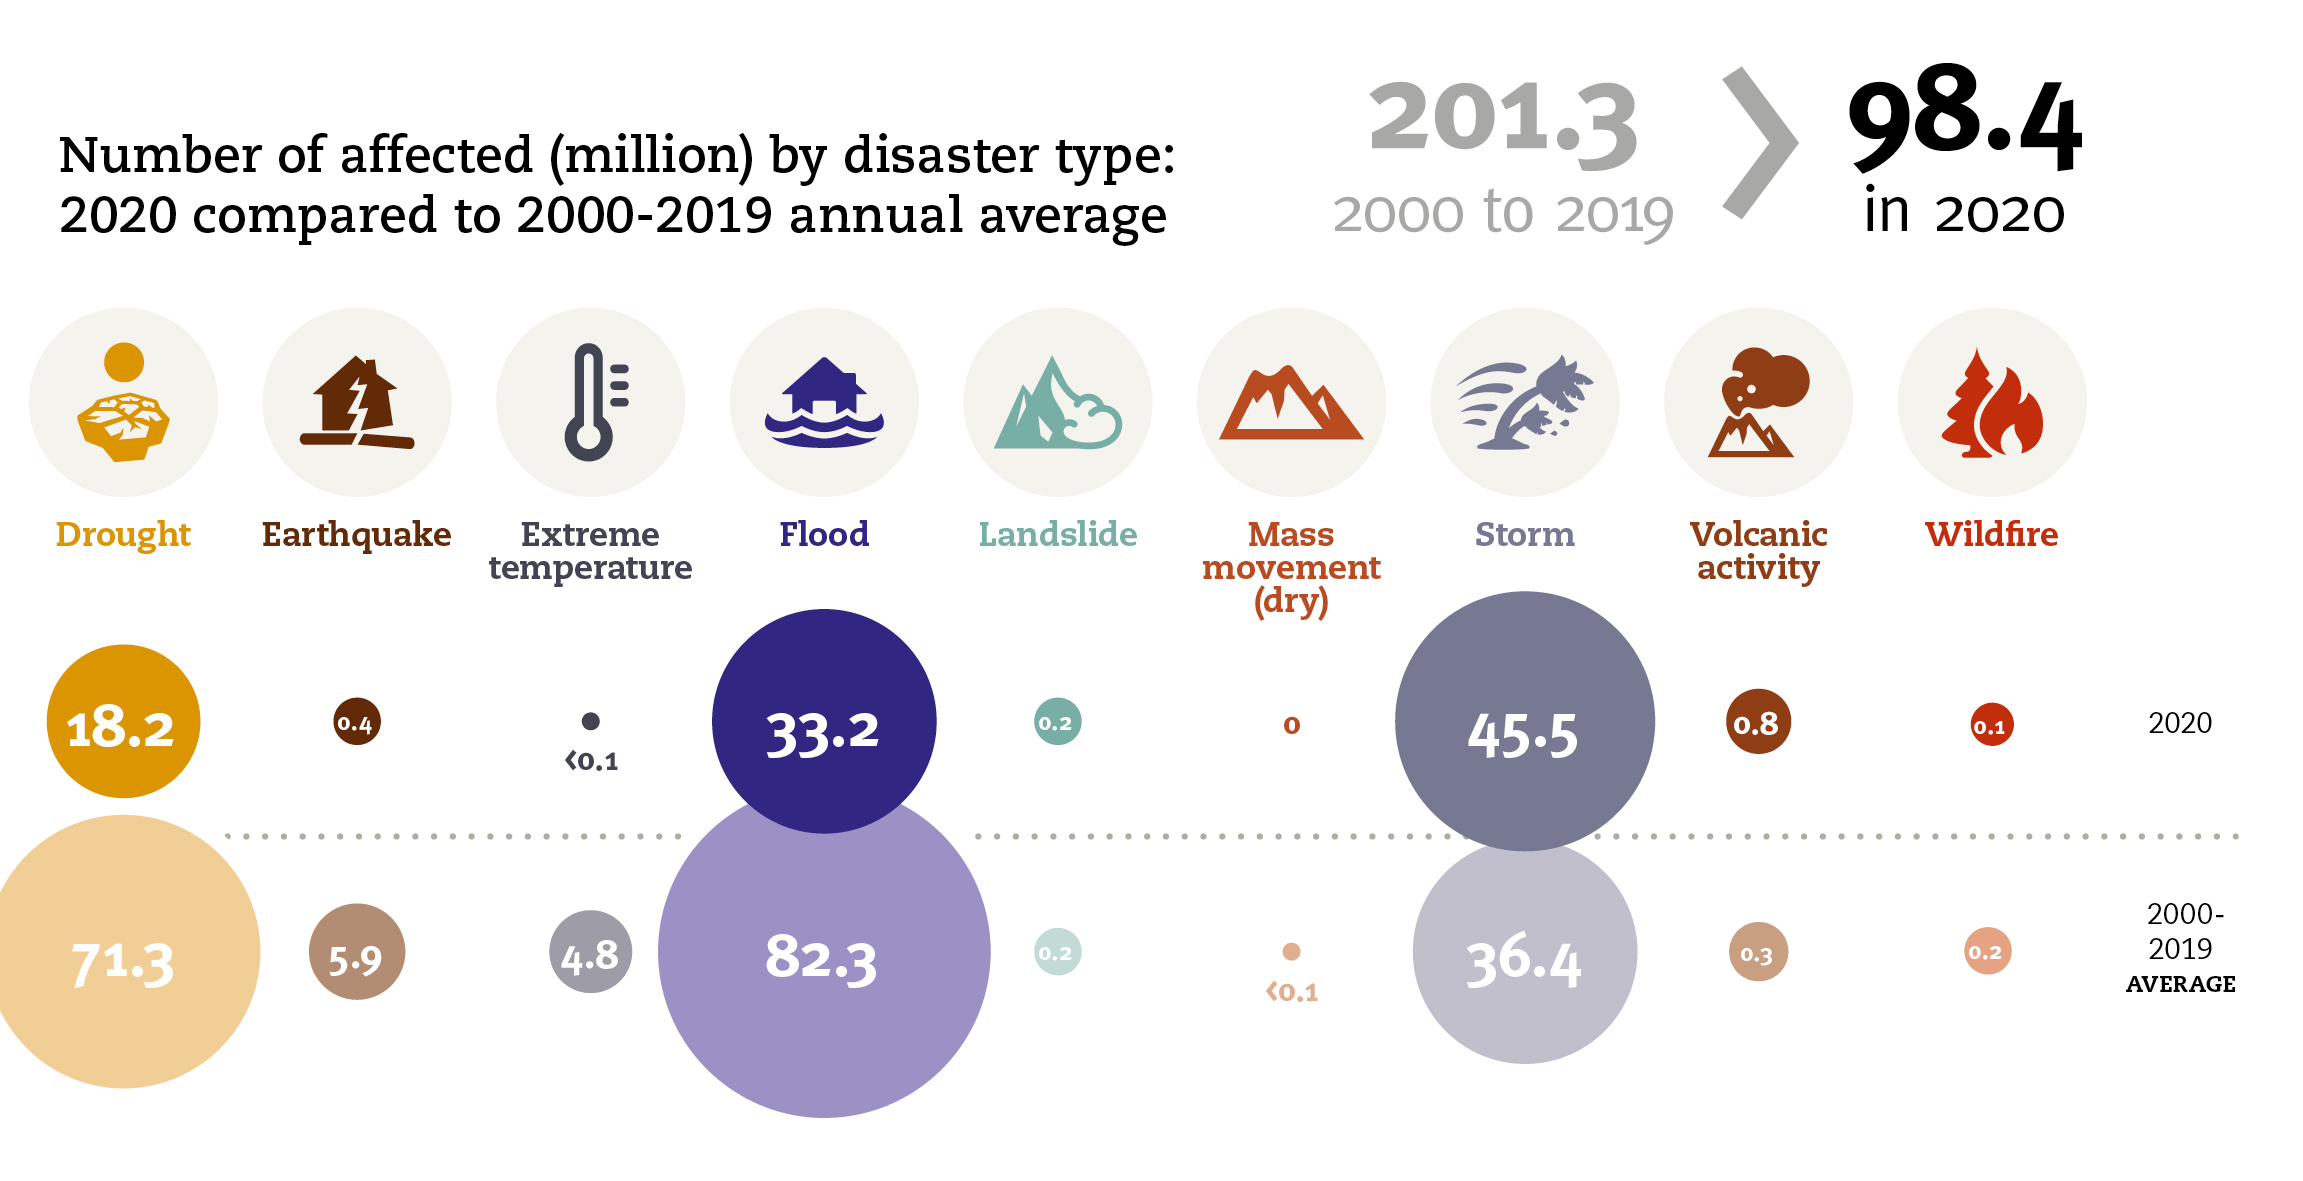 Numbers of disaster affected in 2020